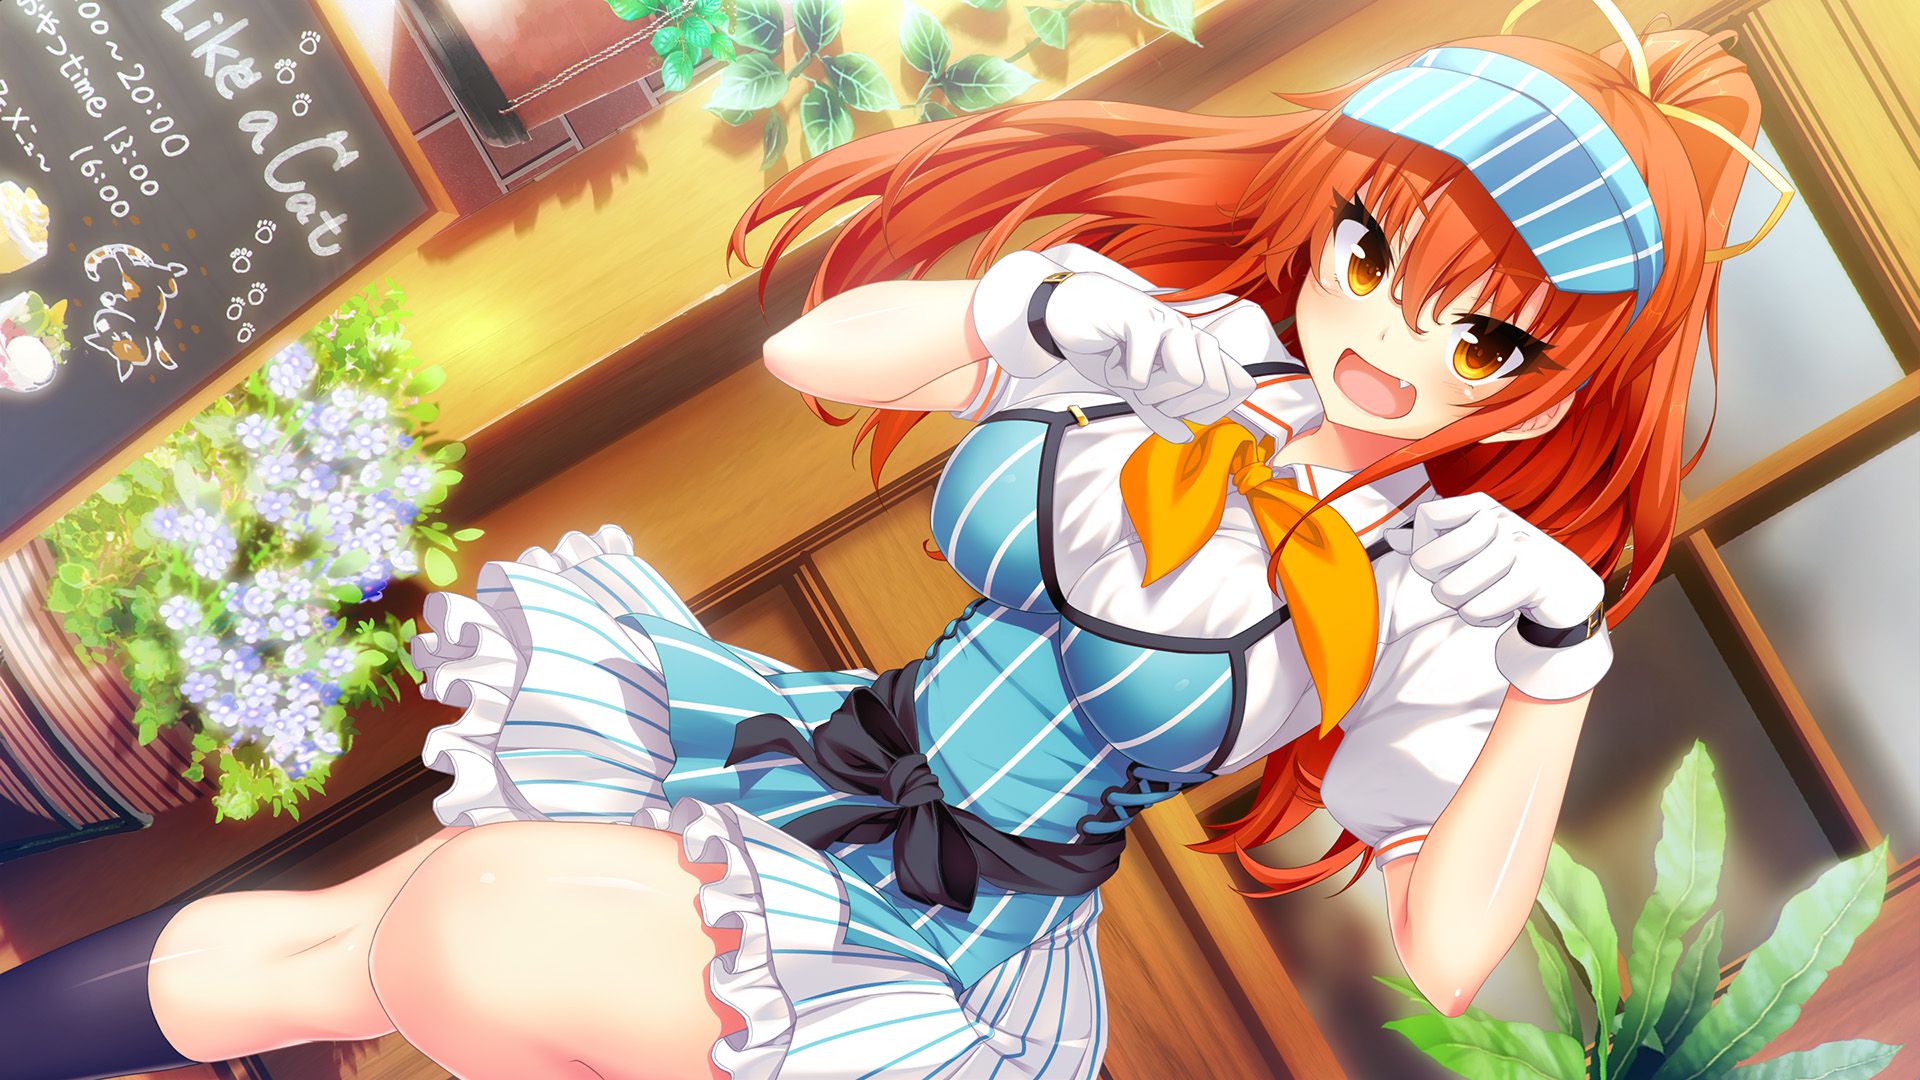 Nora and Princess and the stray cats heart [18 PC Bishoujo game CG] erotic wallpapers and pictures part 1 3